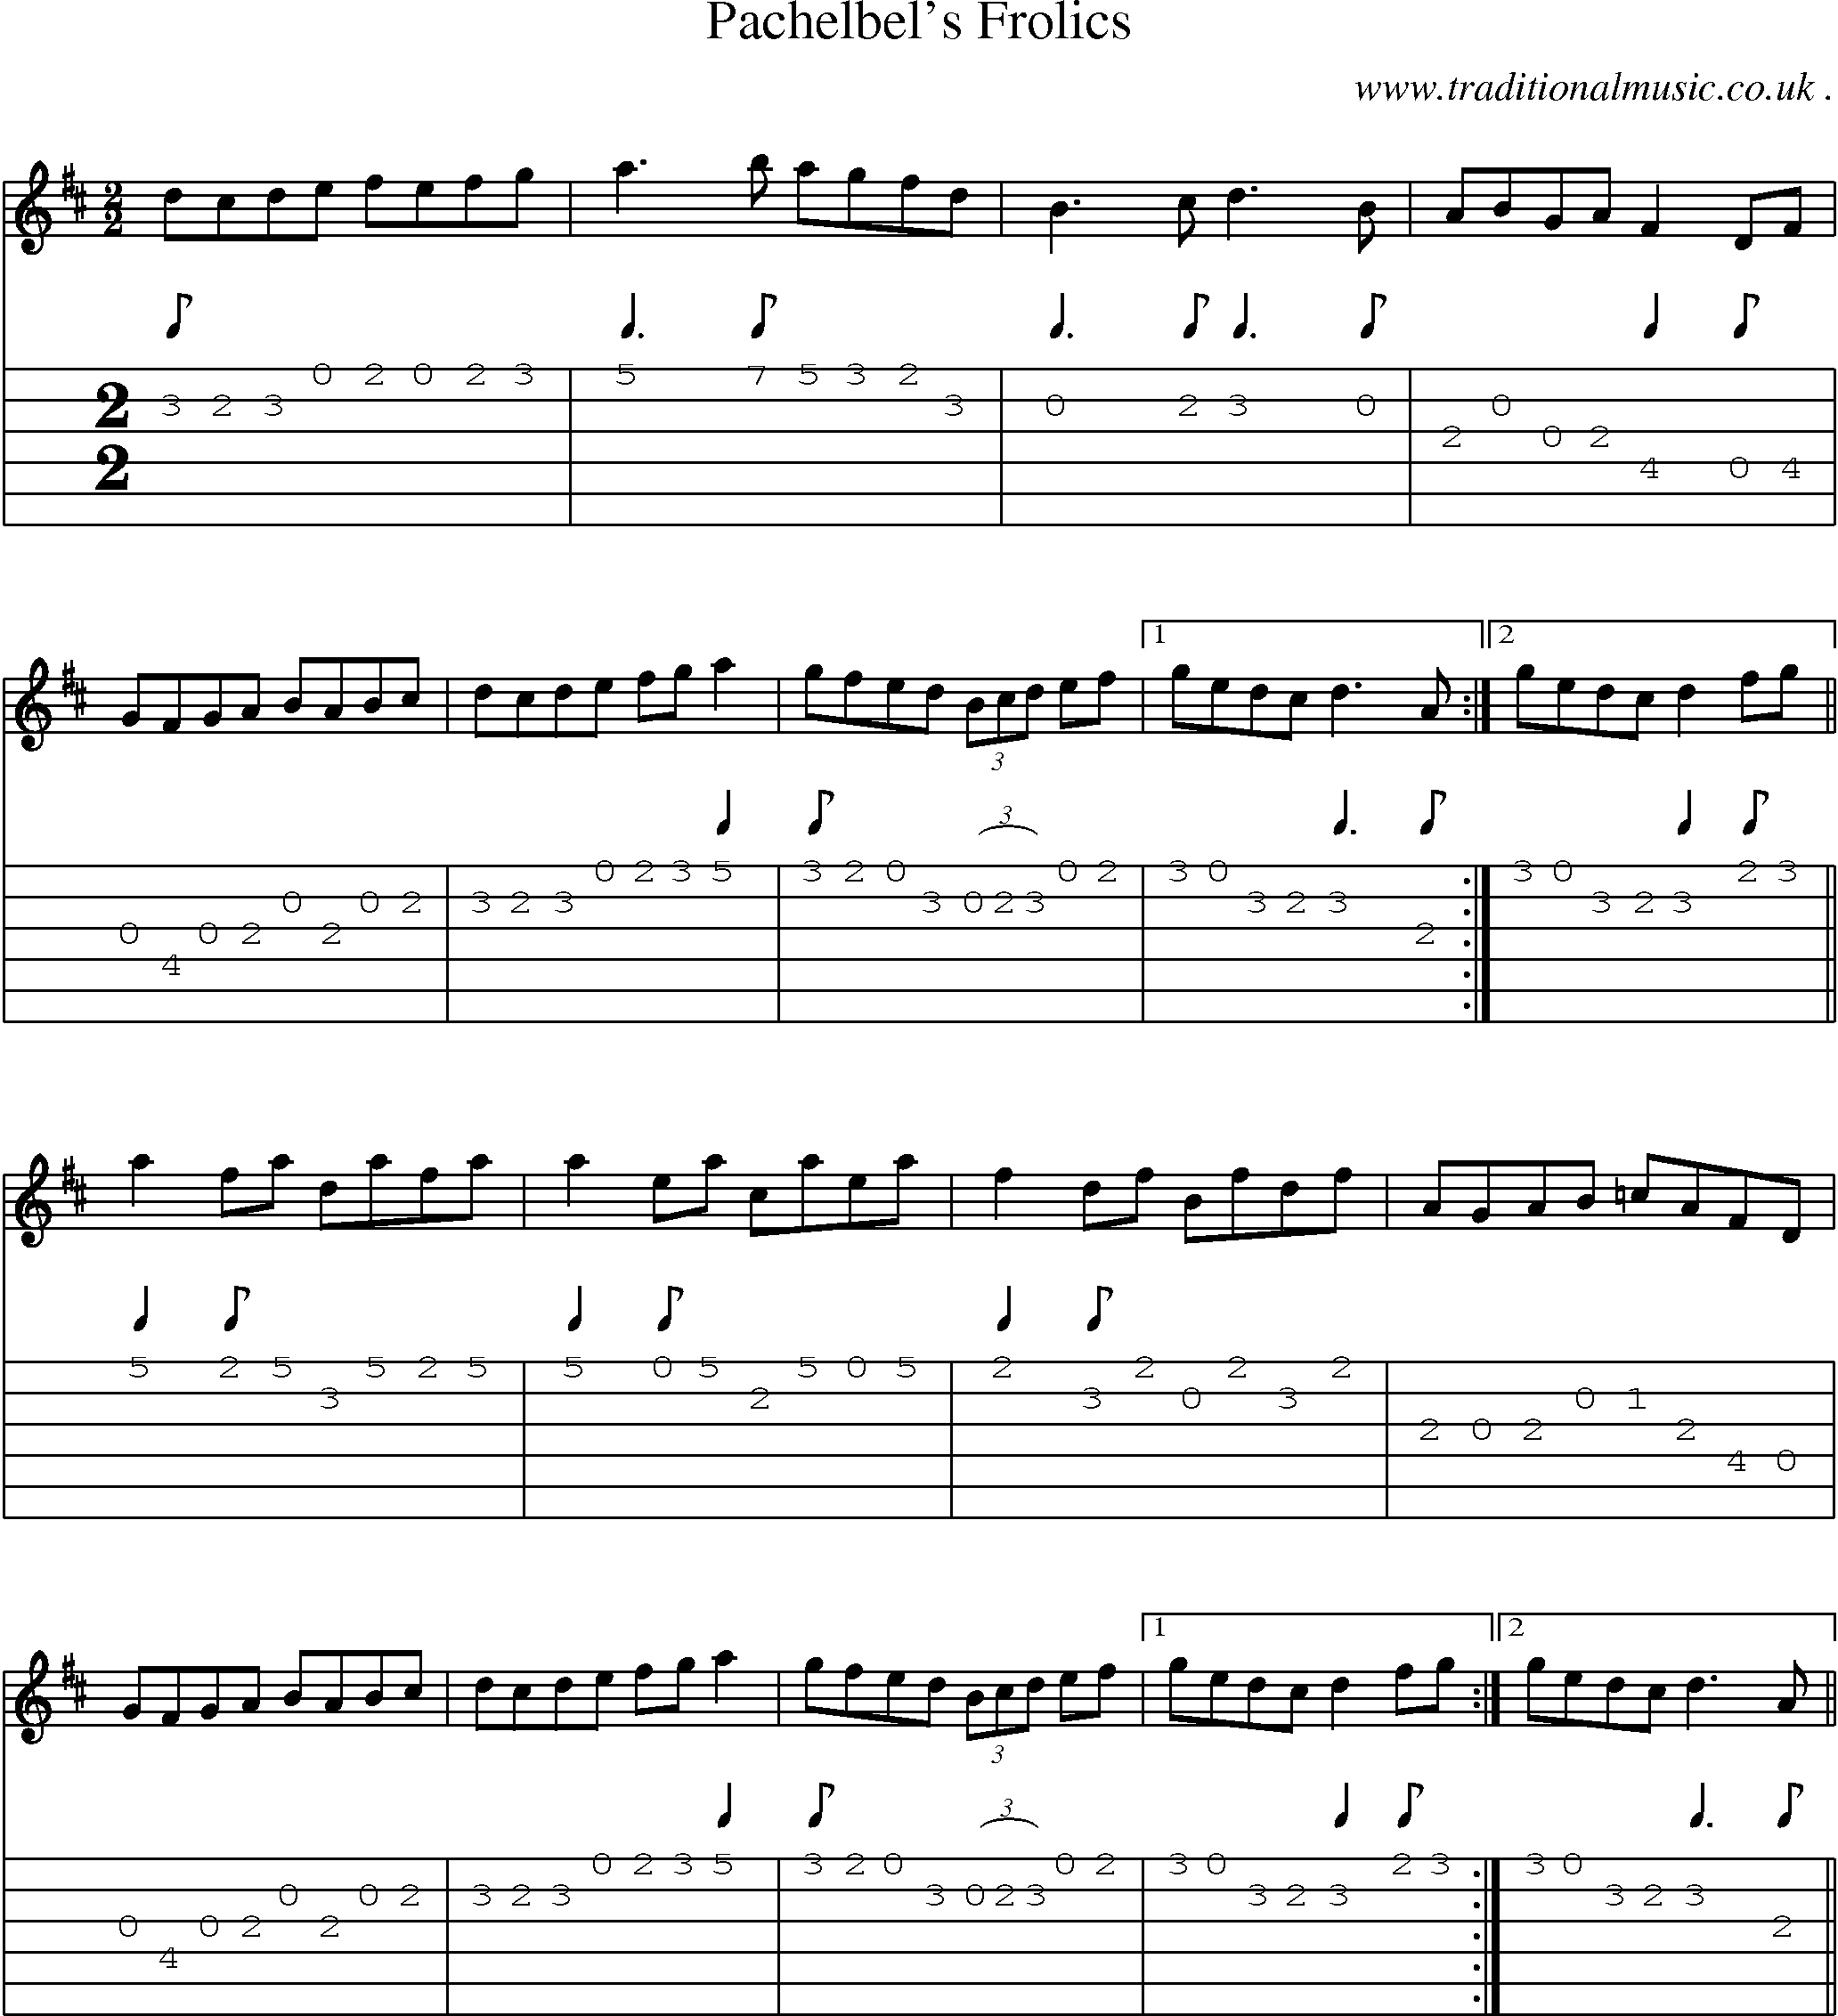 Sheet-Music and Guitar Tabs for Pachelbels Frolics